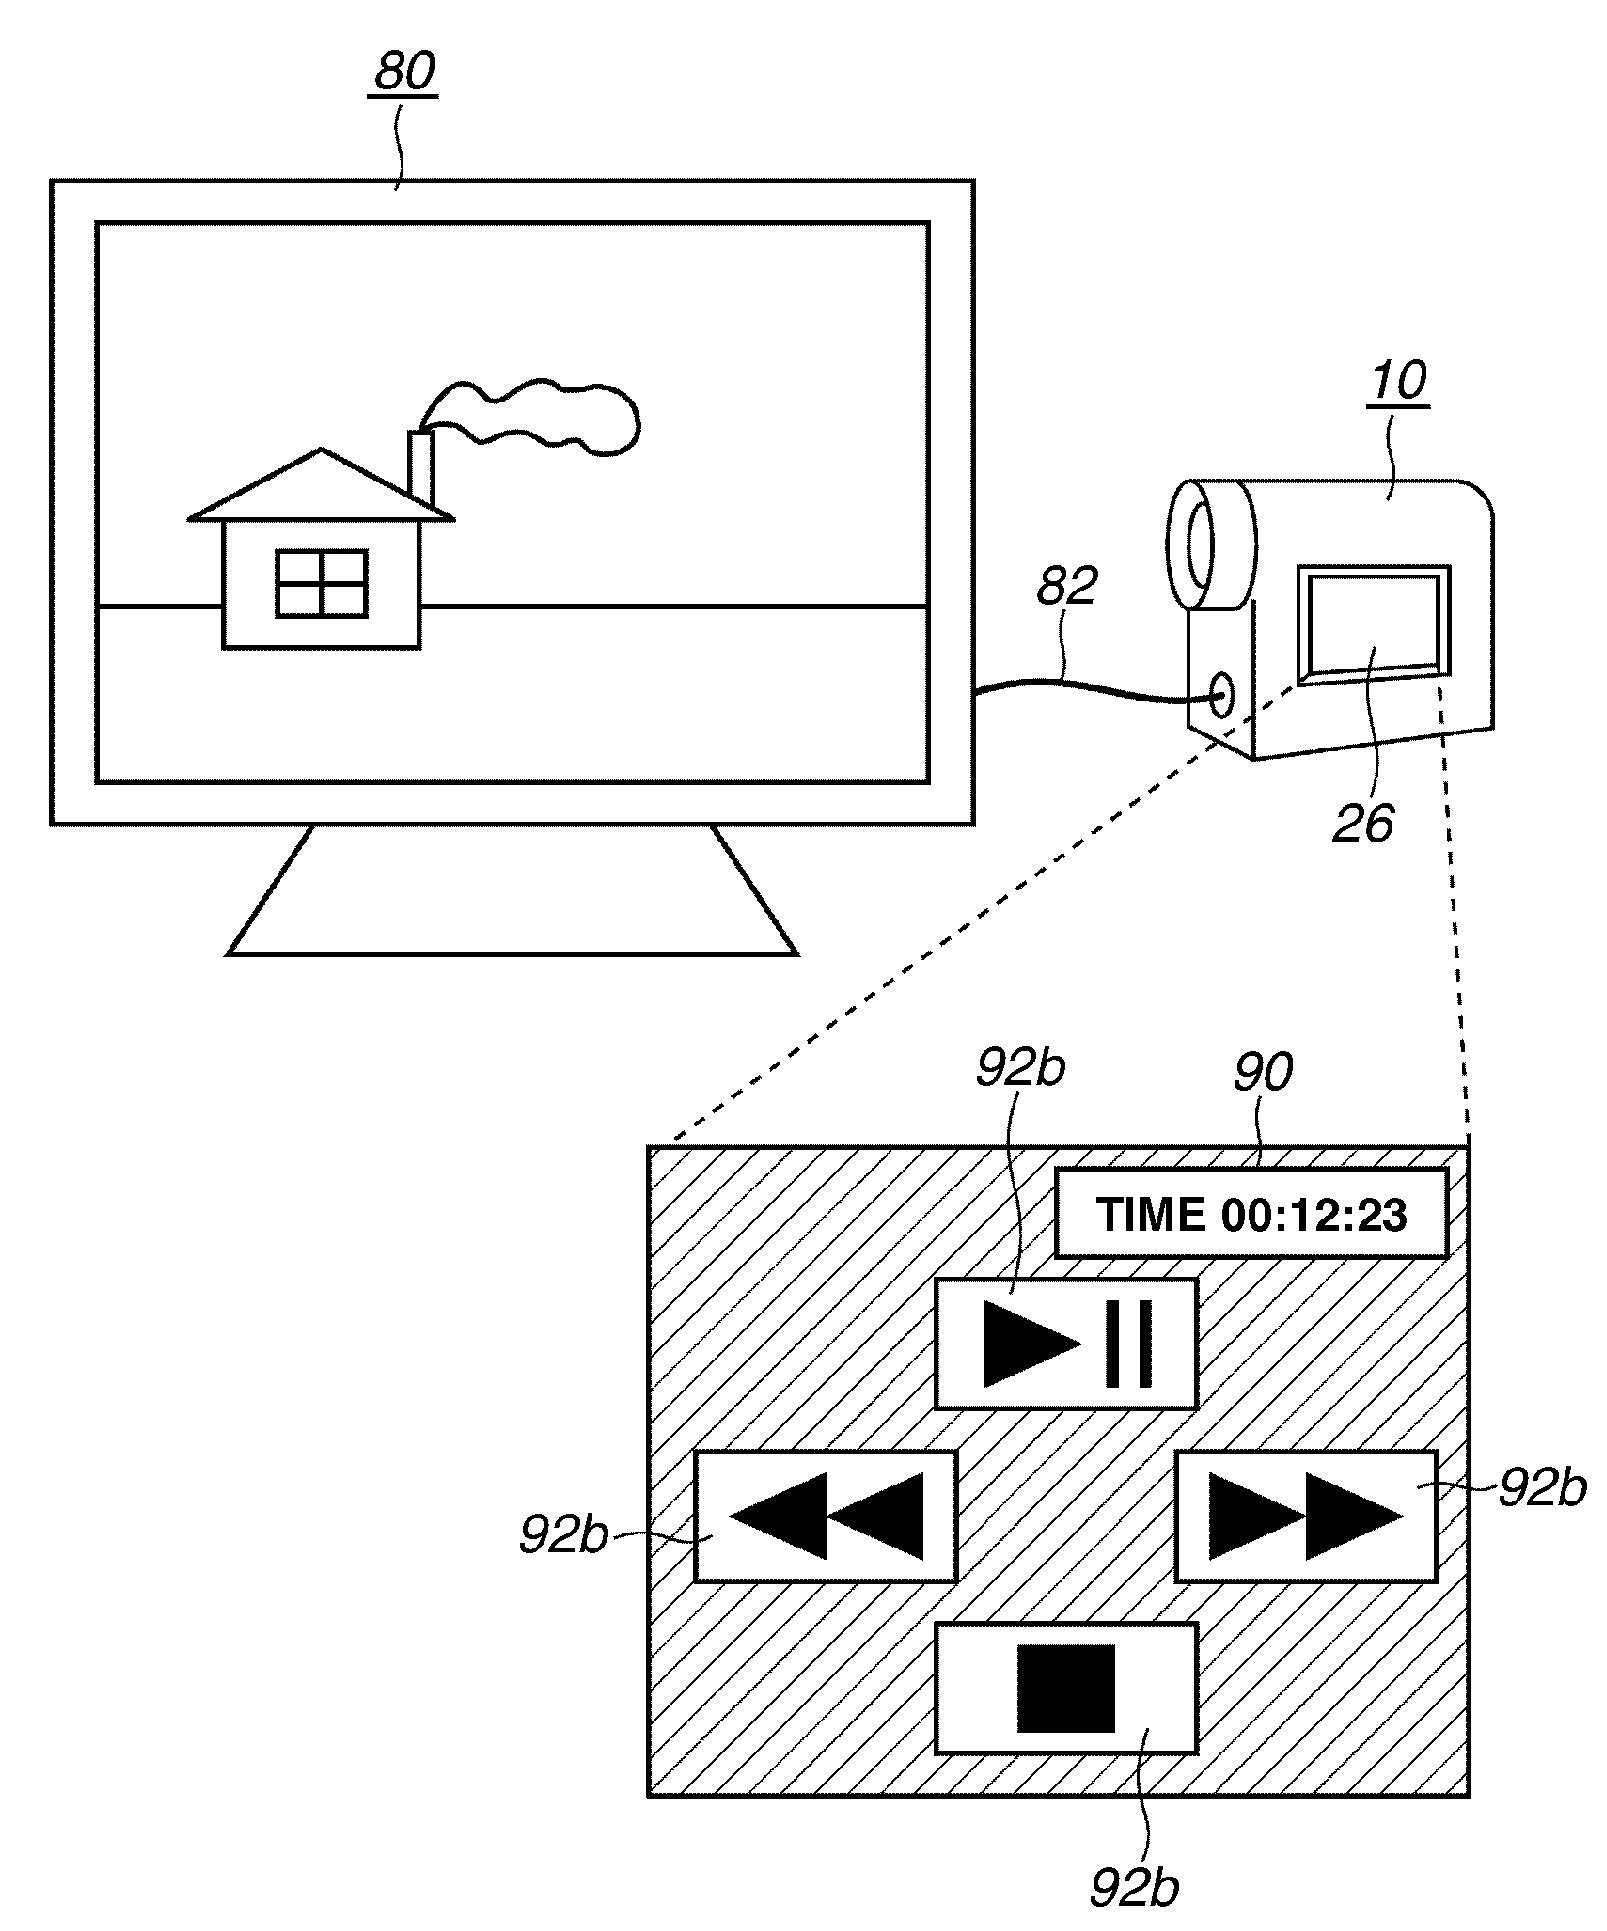 Image reproducing apparatus and control method